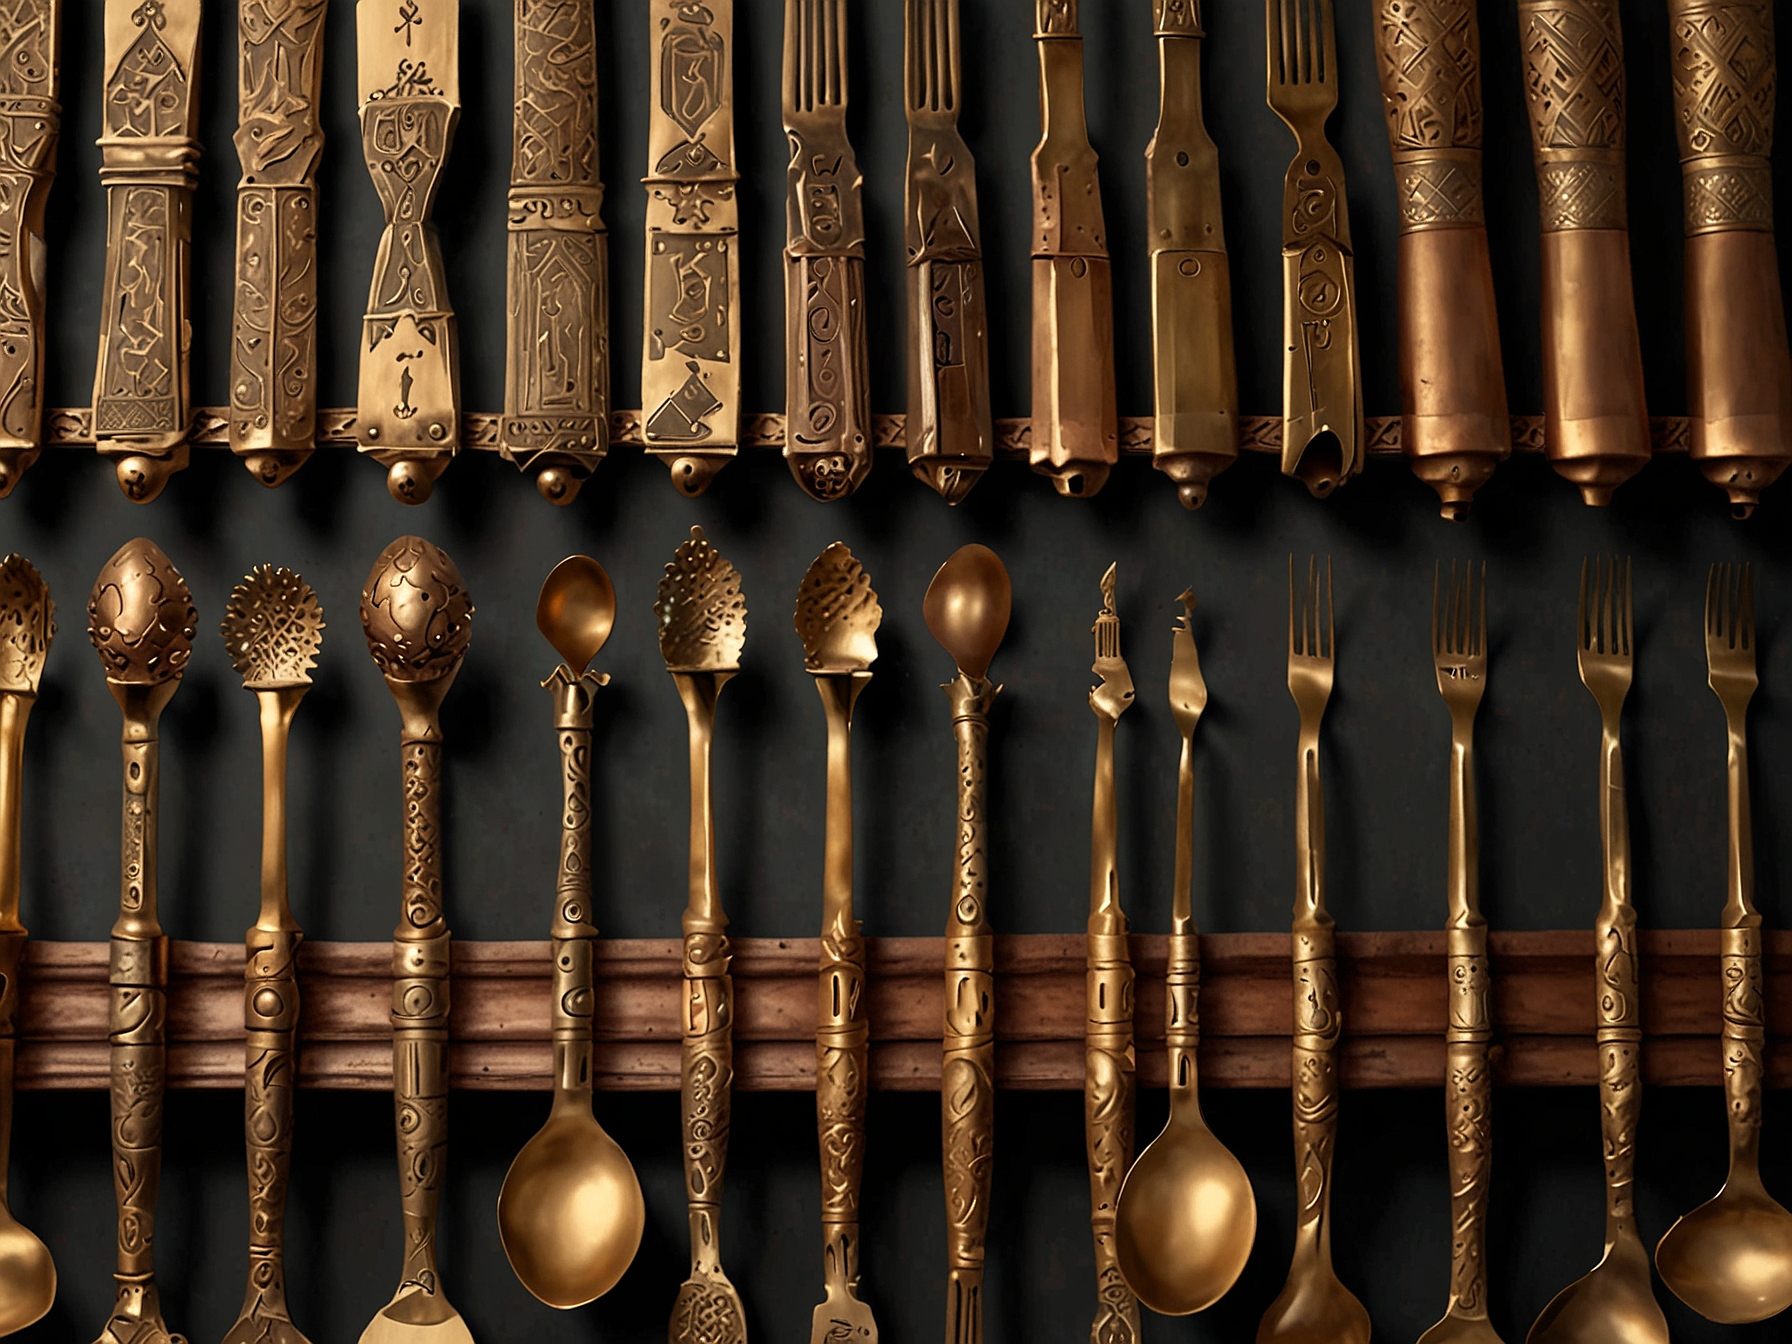 An array of restored bronze, brass, and copper utensils gleams under soft light, each piece carefully restored by Ahmad Bakhsh, showcasing the timeless beauty of traditional qalai craftsmanship.